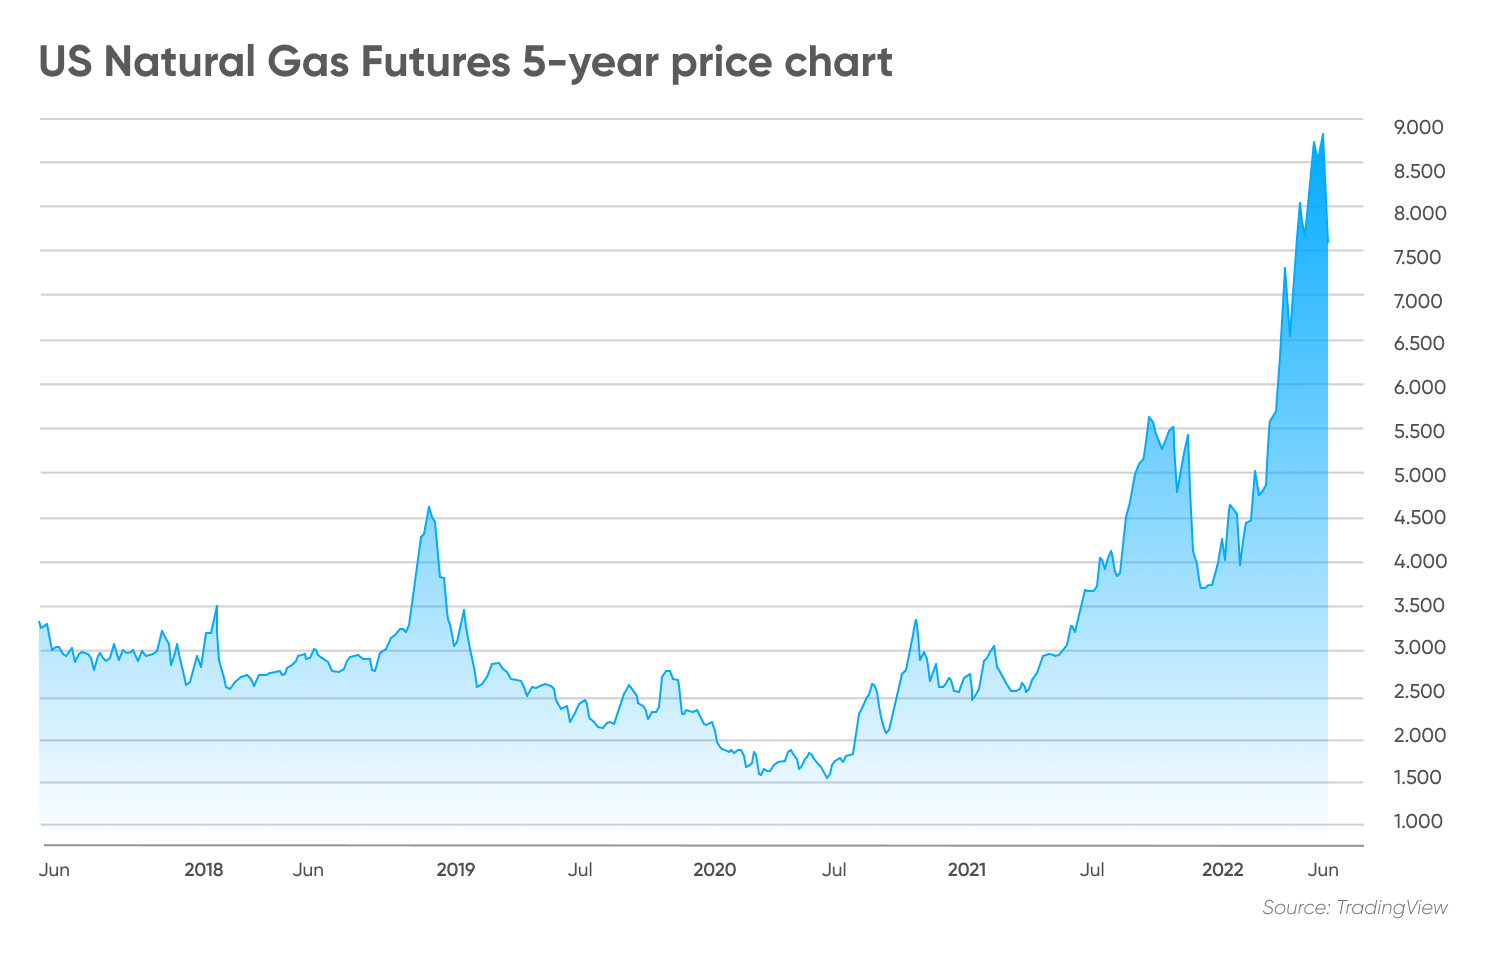 US Natural Gas Futures 5-year price chart